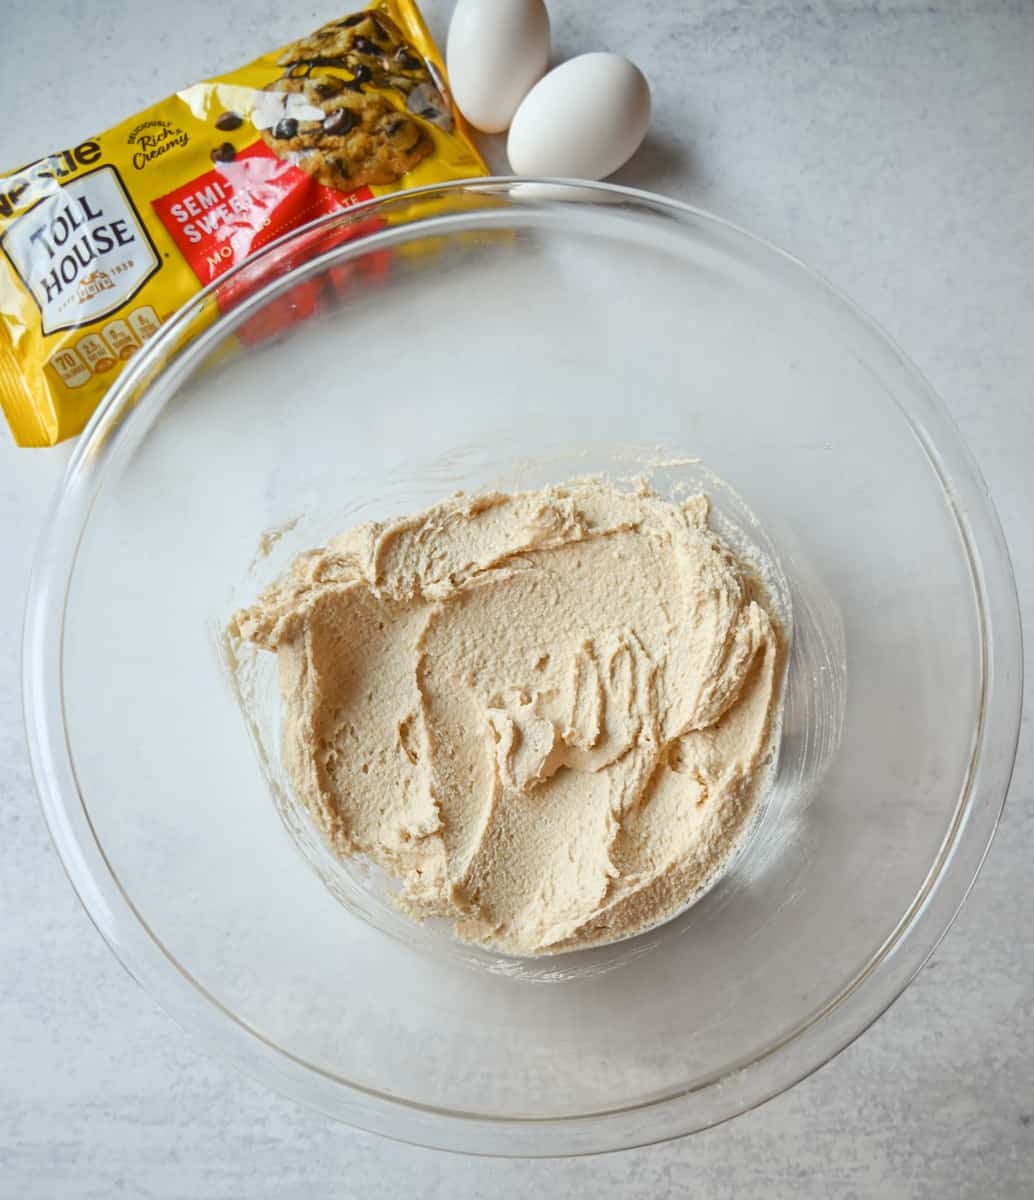 Beating together butter and sugars to make Nestle Toll House cookies